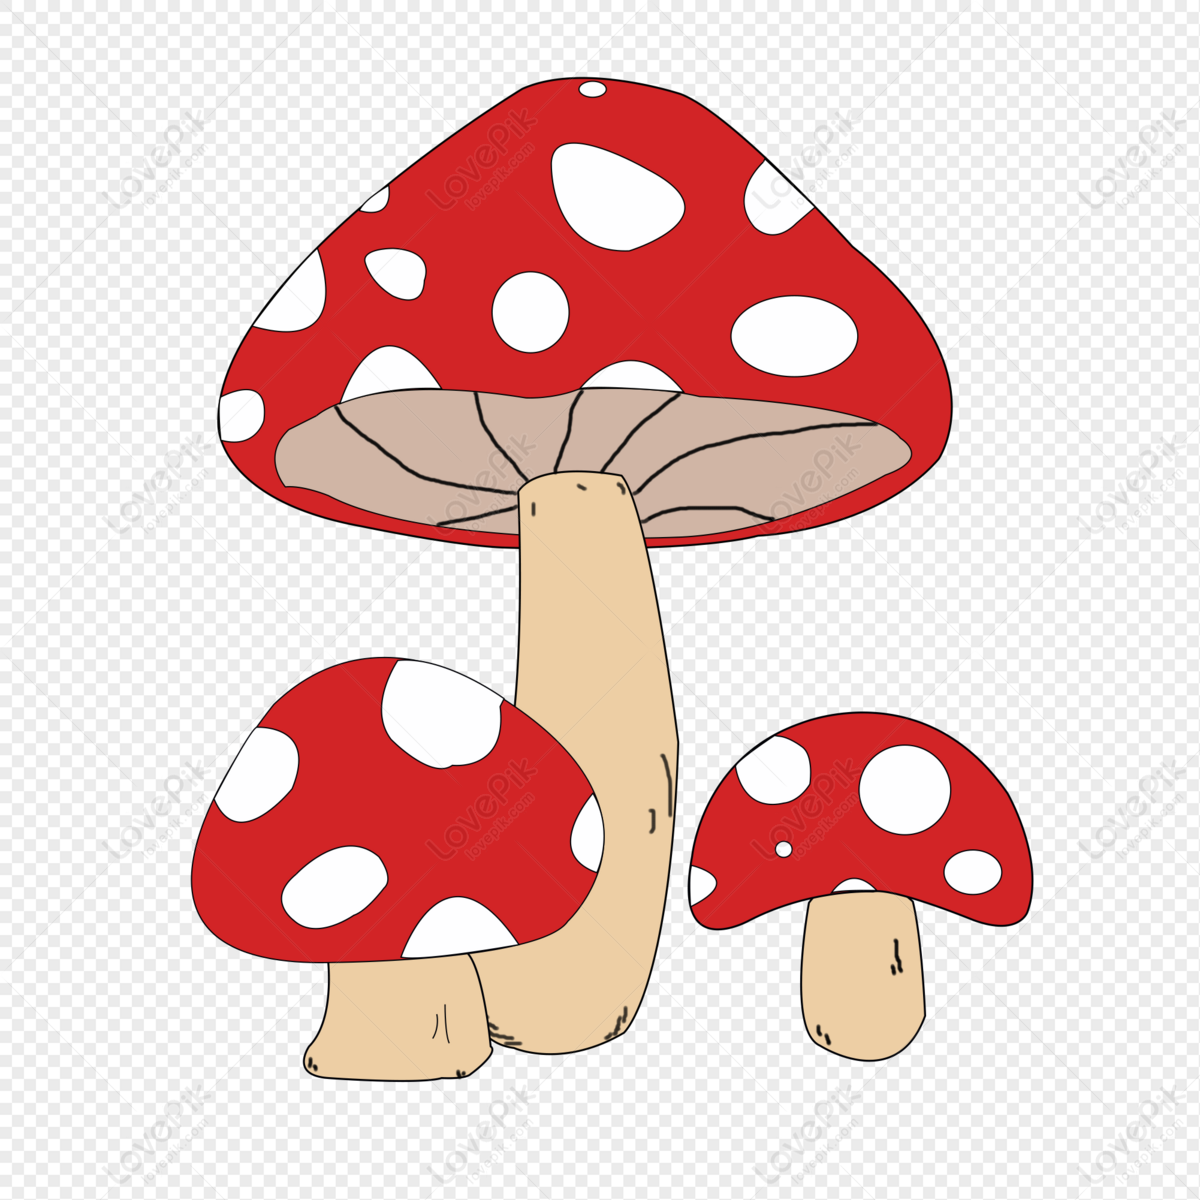 Mushroom PNG Transparent Background And Clipart Image For Free Download -  Lovepik | 401190350